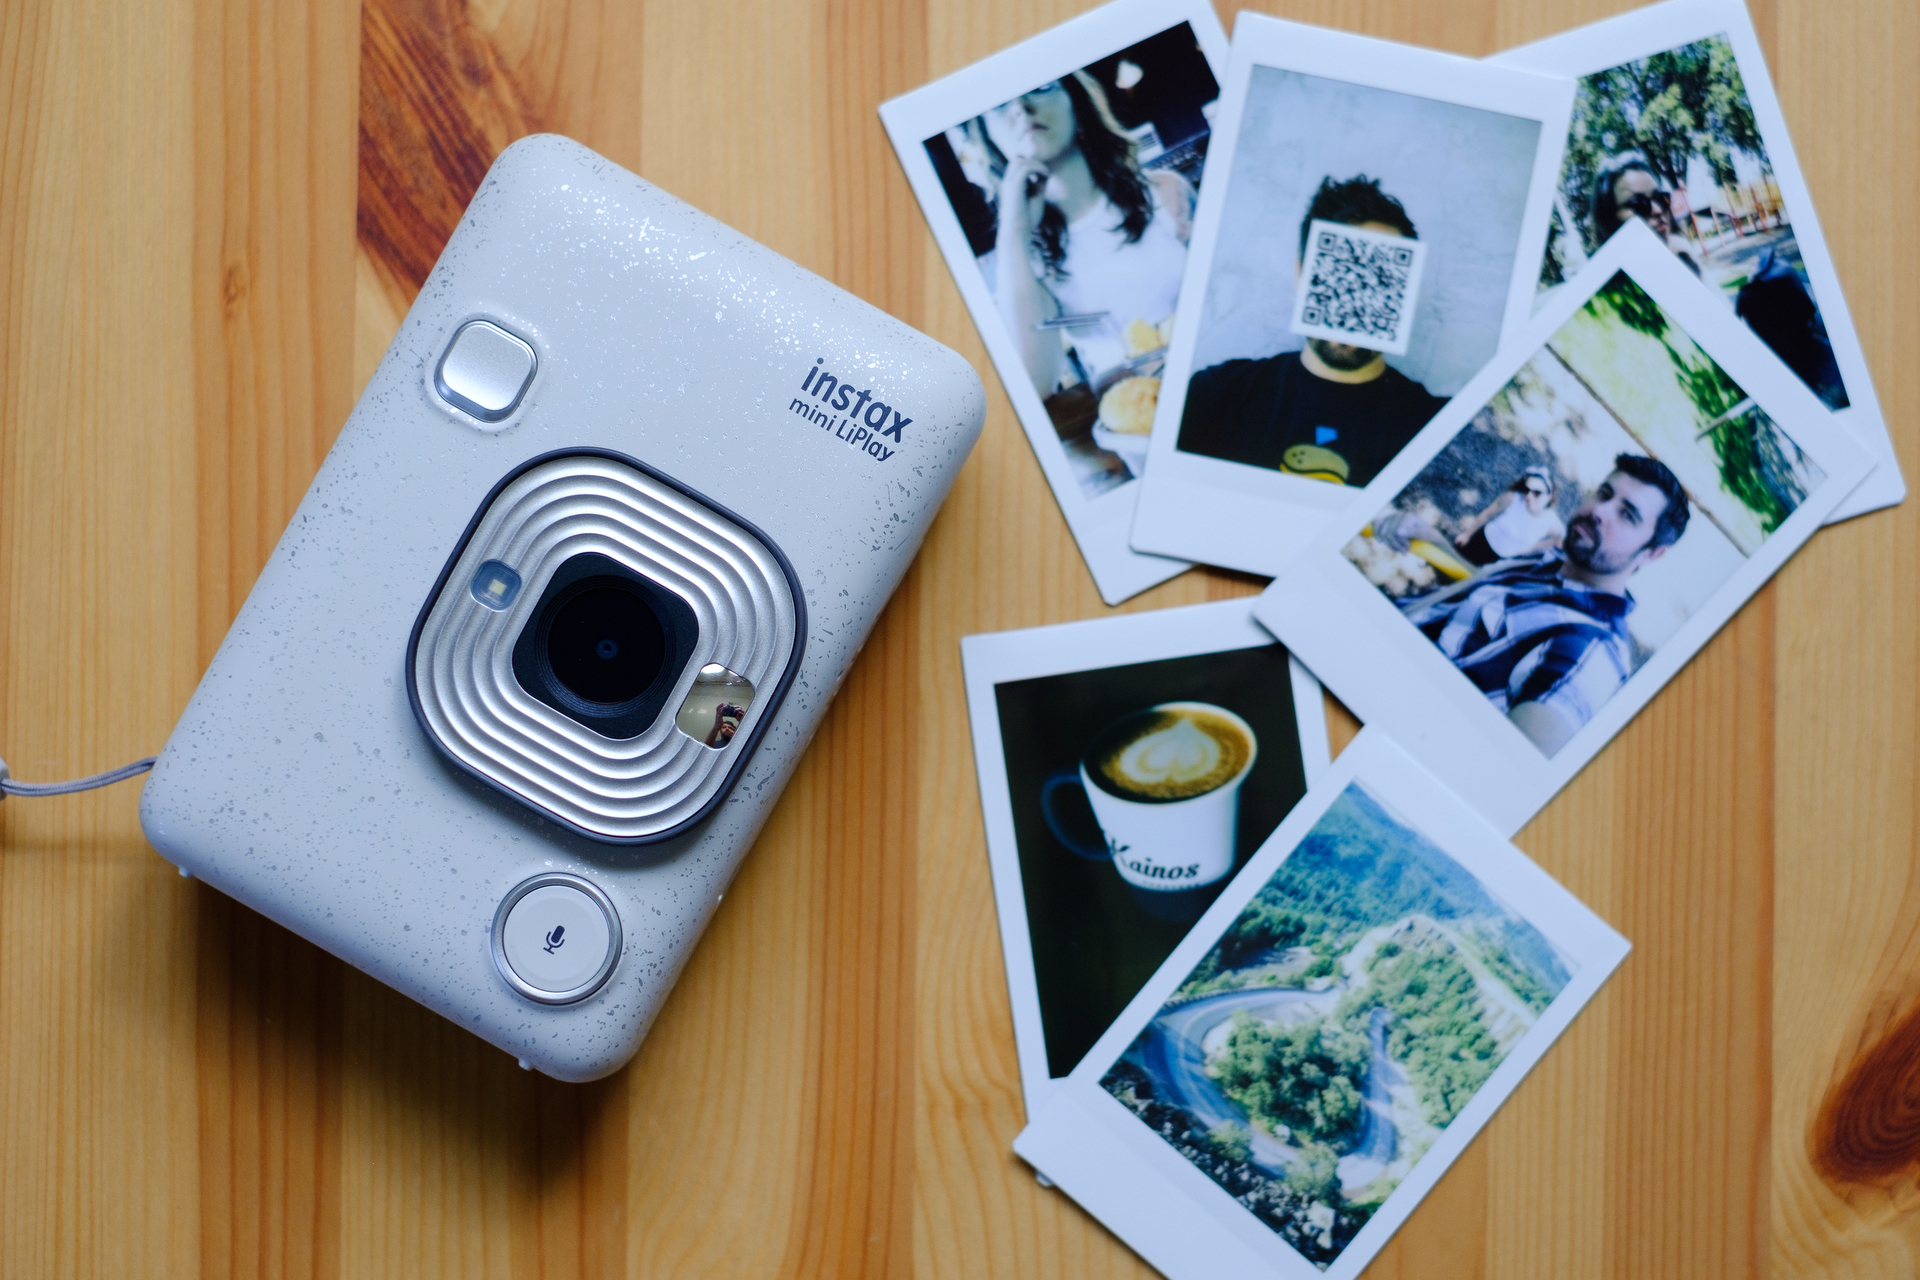 Fujifilm Instax Mini LiPlay Review: A Cam and Printer In One